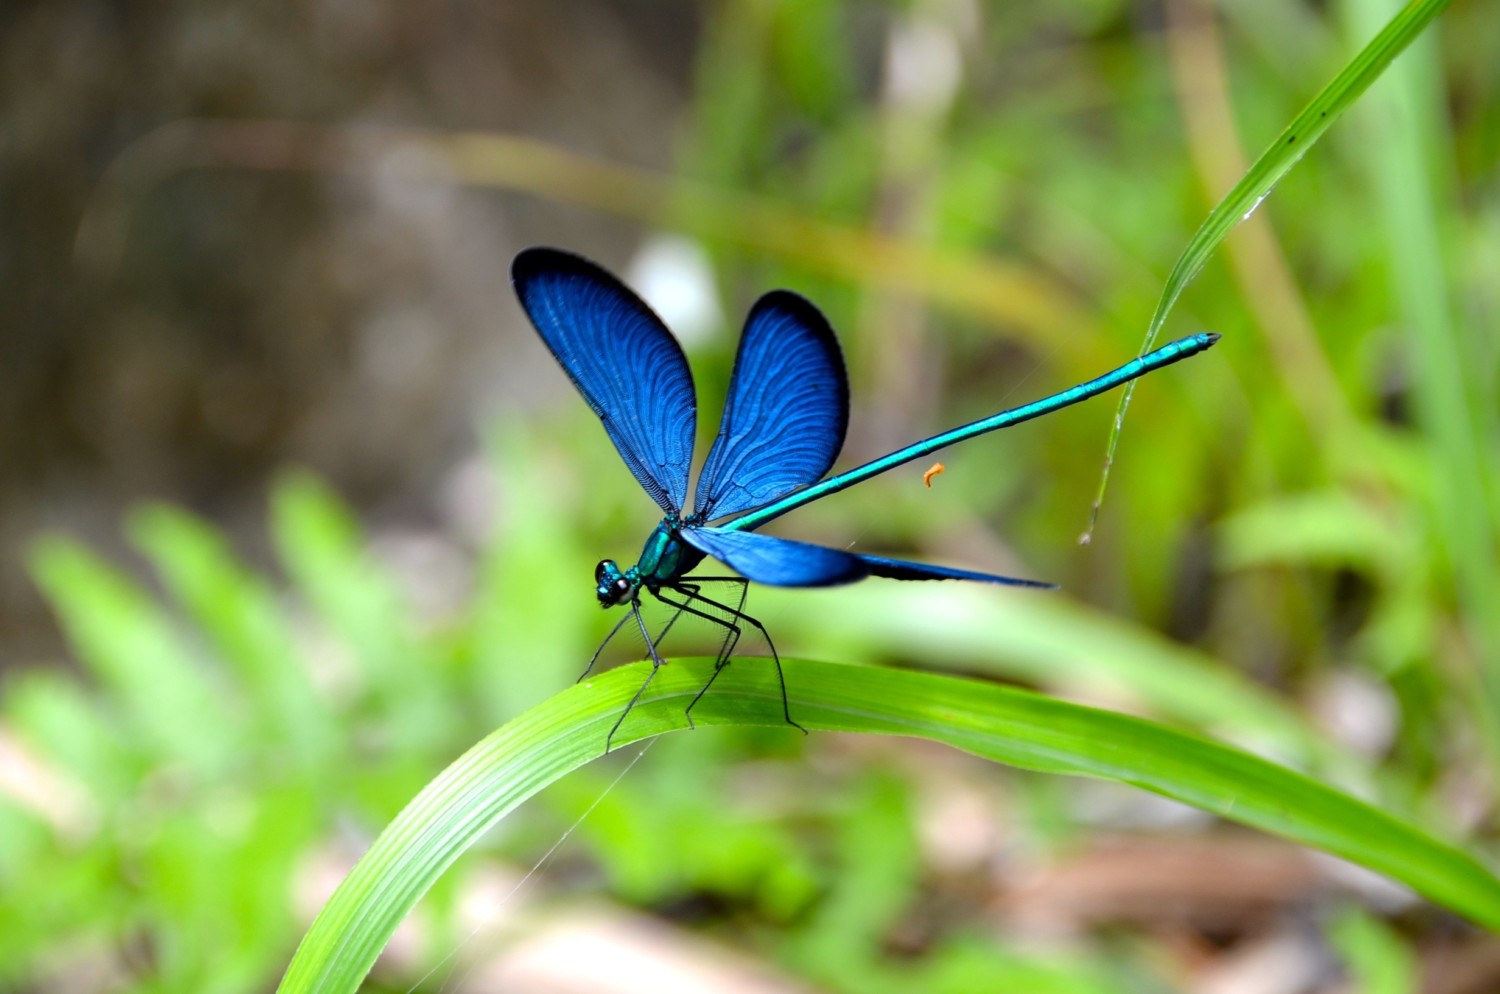 Sapphire dragonfly rests on a plant